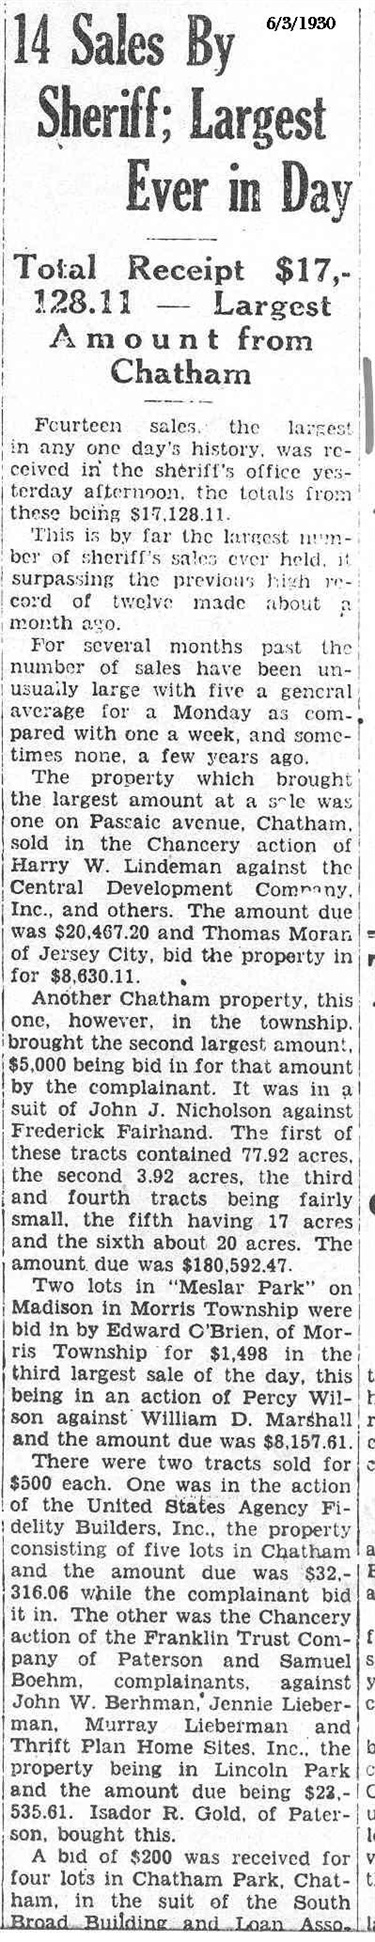 June 3, 1930: 14 Sales by Sheriff; Largest Ever in Day